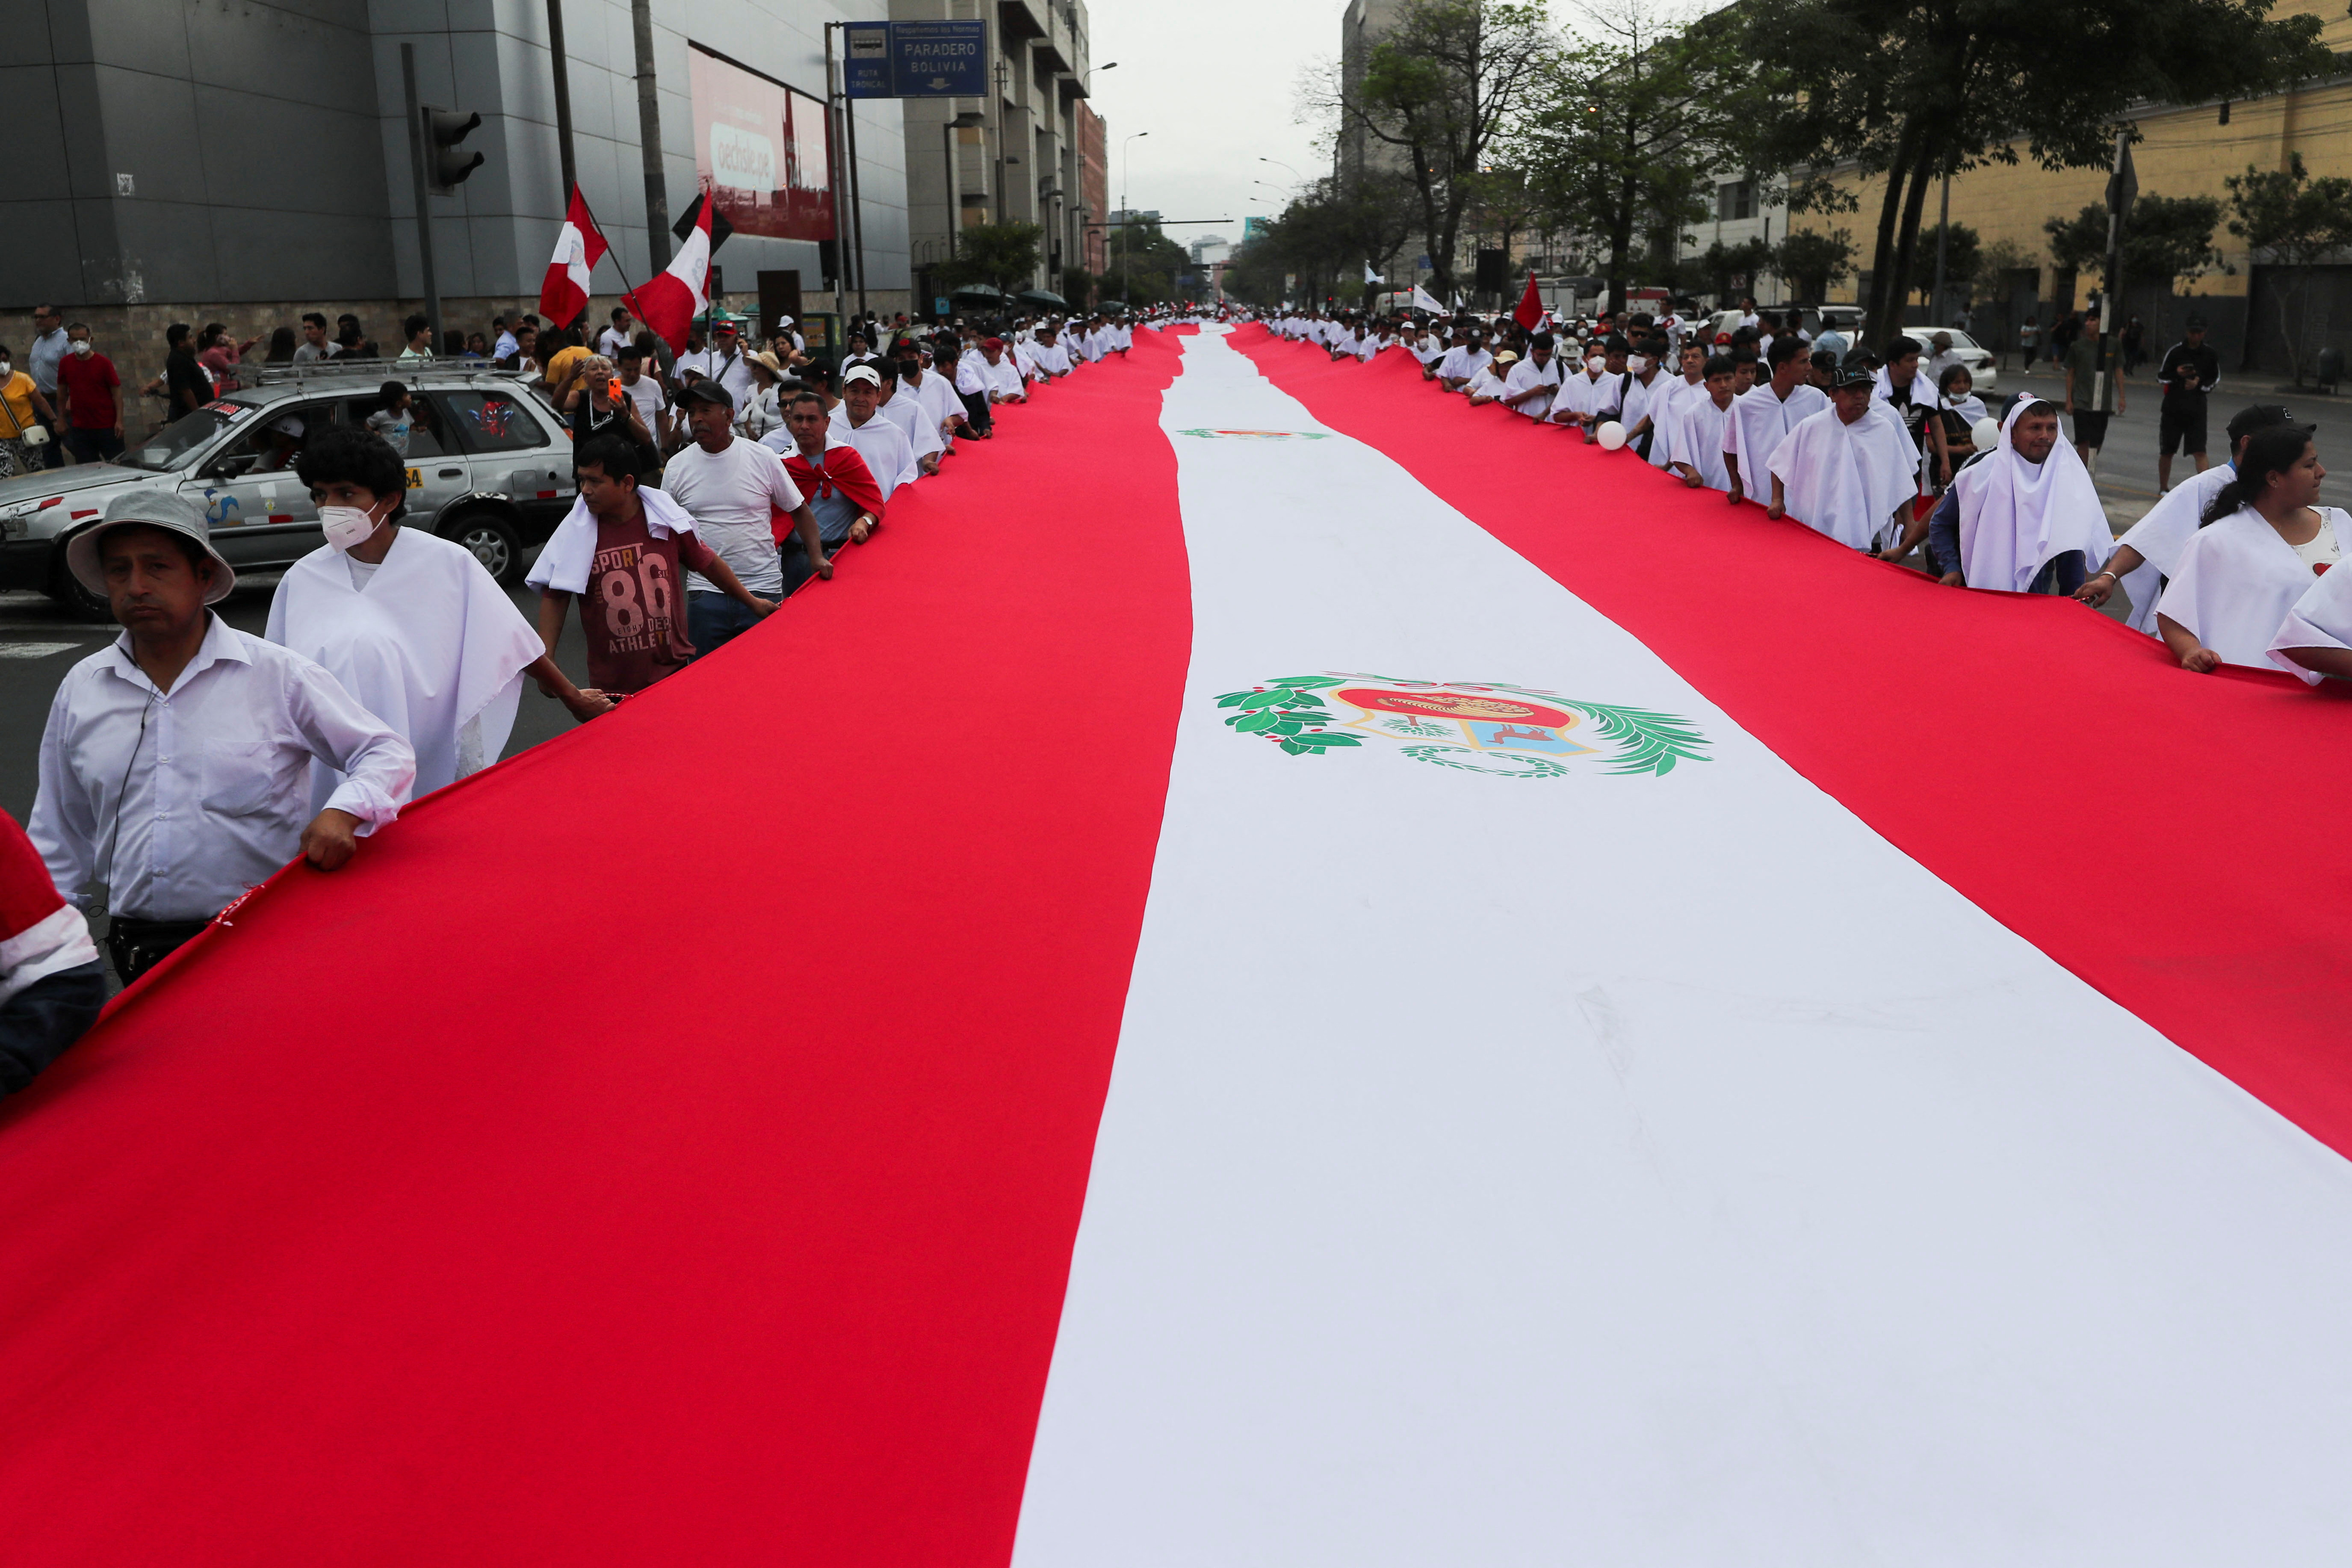 March asking for peace following the violent outbreak after the ousting and arrest of former President Pedro Castillo, in Lima